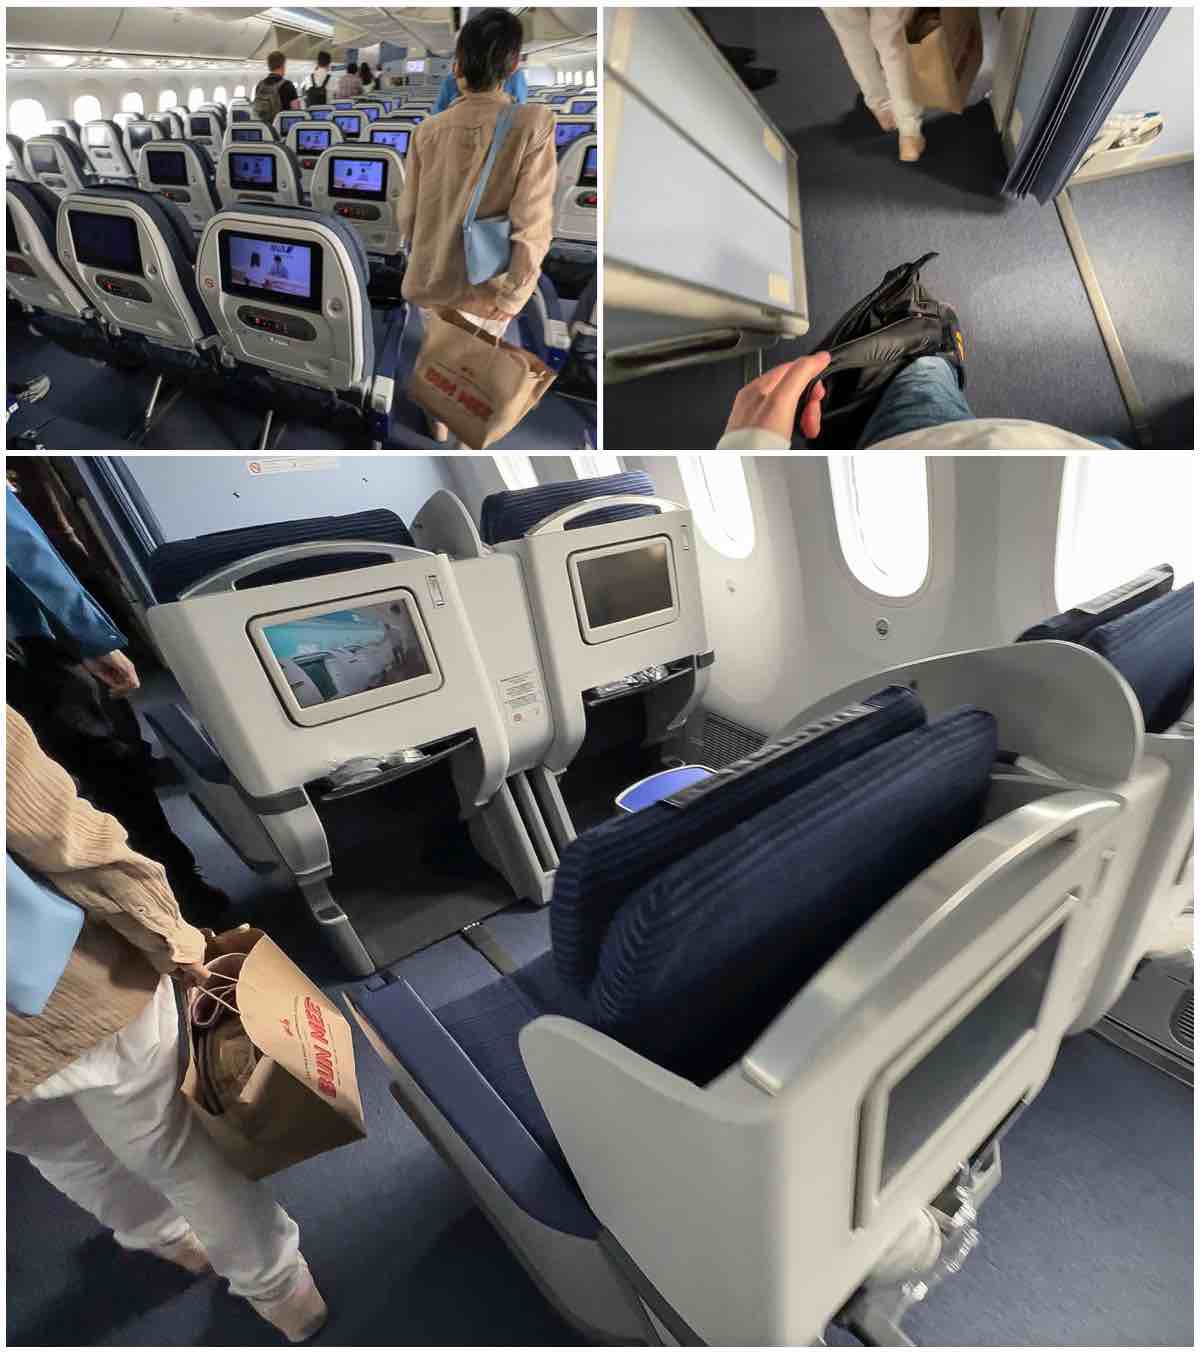 ANA 787-8 economy and business class cabins